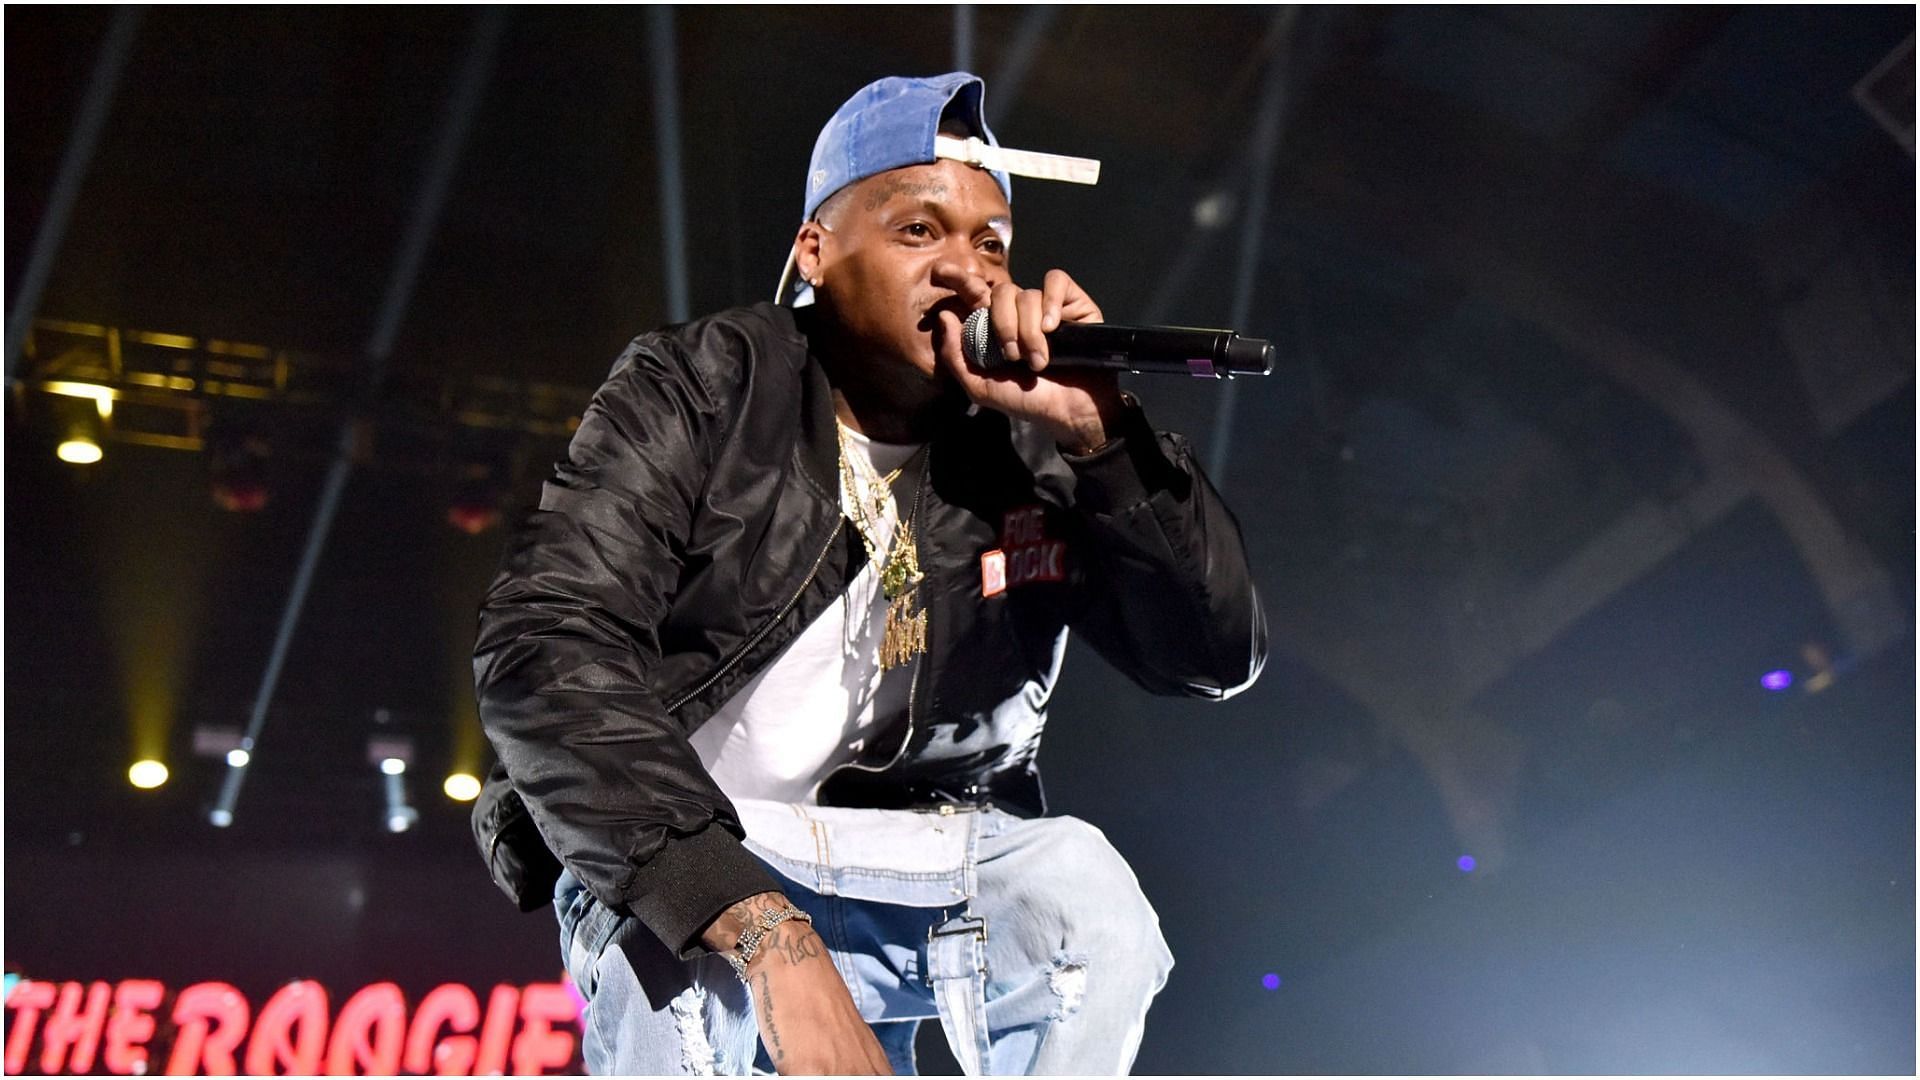 Slim 400 performs onstage during the first annual YG &amp; Friend&#039;s Nighttime Boogie Concert at The Shrine Auditorium (Image by Scott Dudelson via Getty Images)